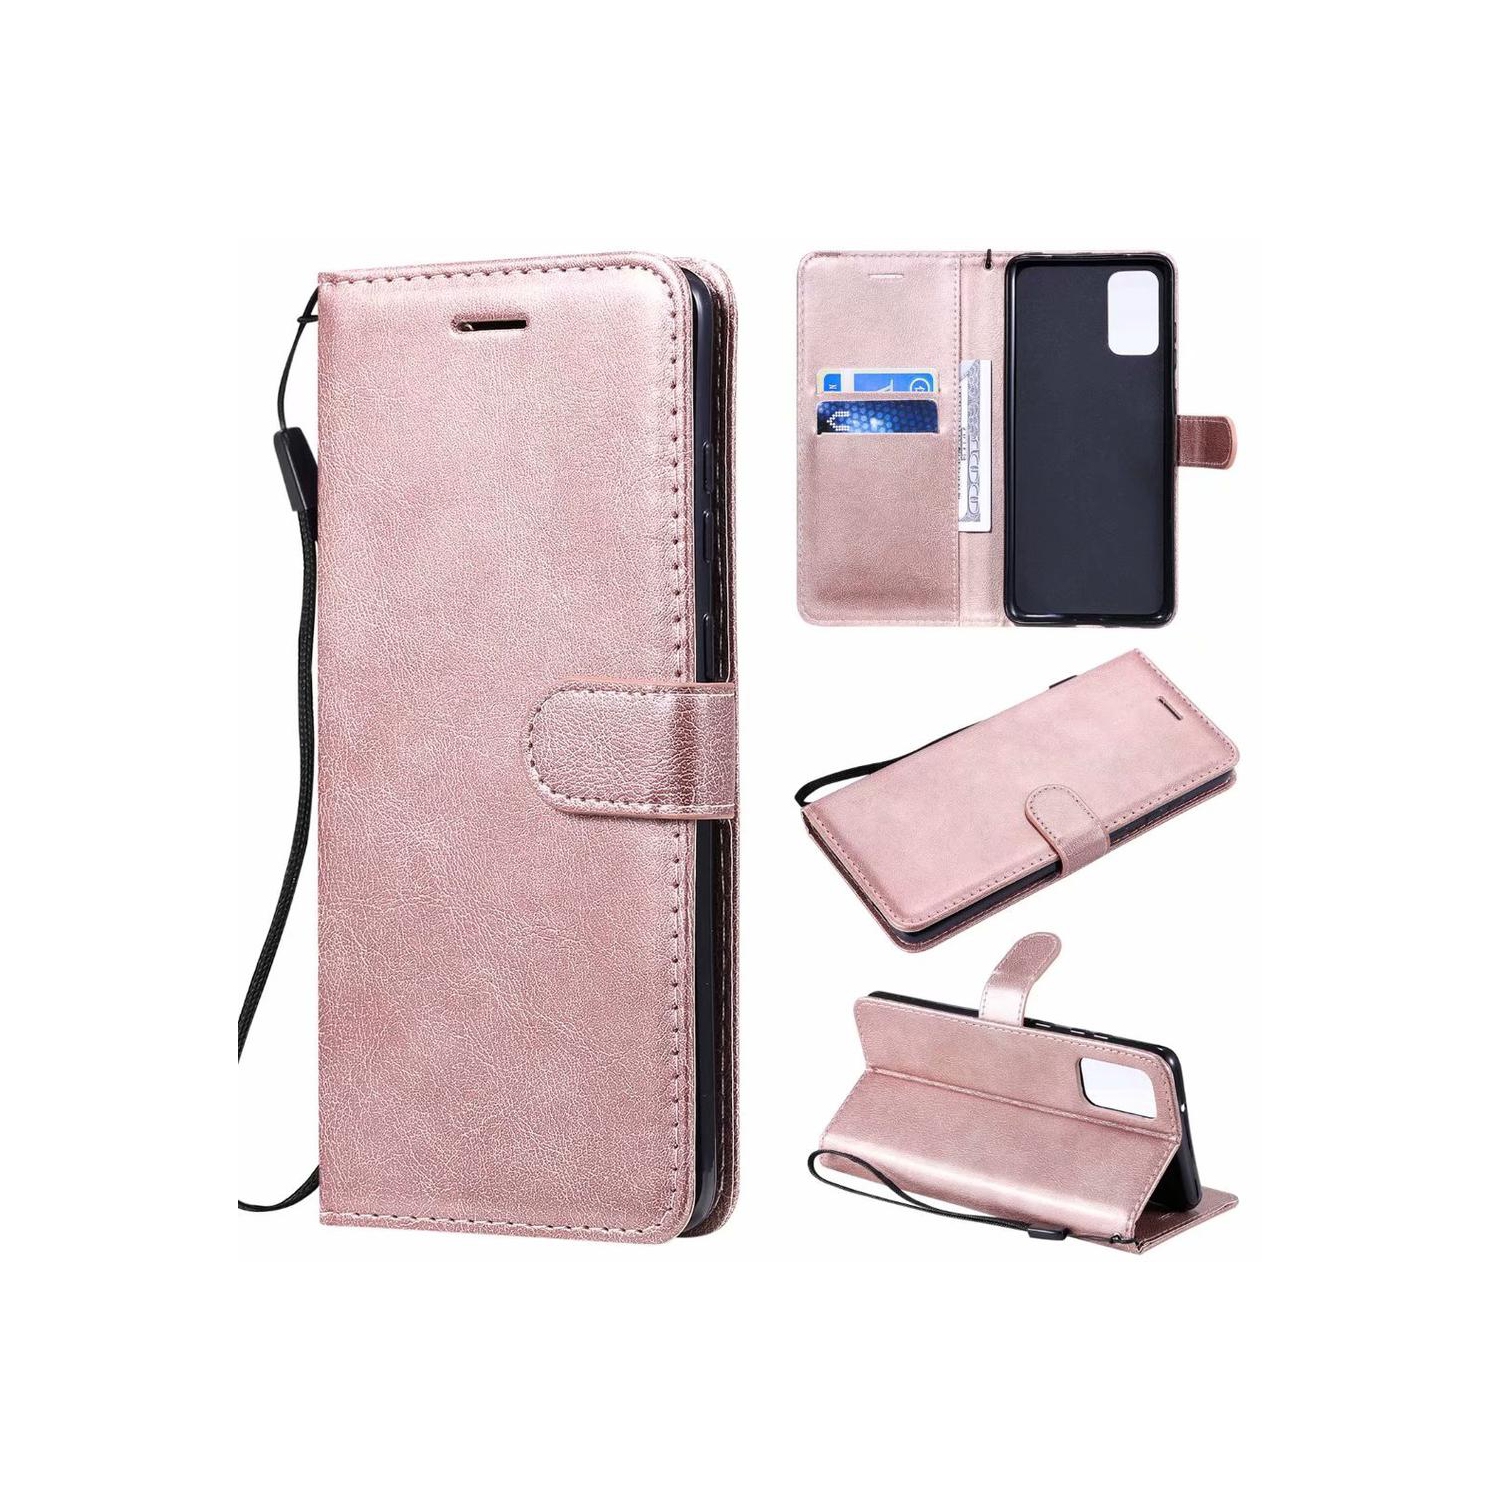 [CS] Samsung Galaxy A32 5G Case, Magnetic Leather Folio Wallet Flip Case Cover with Card Slot, Rose Gold